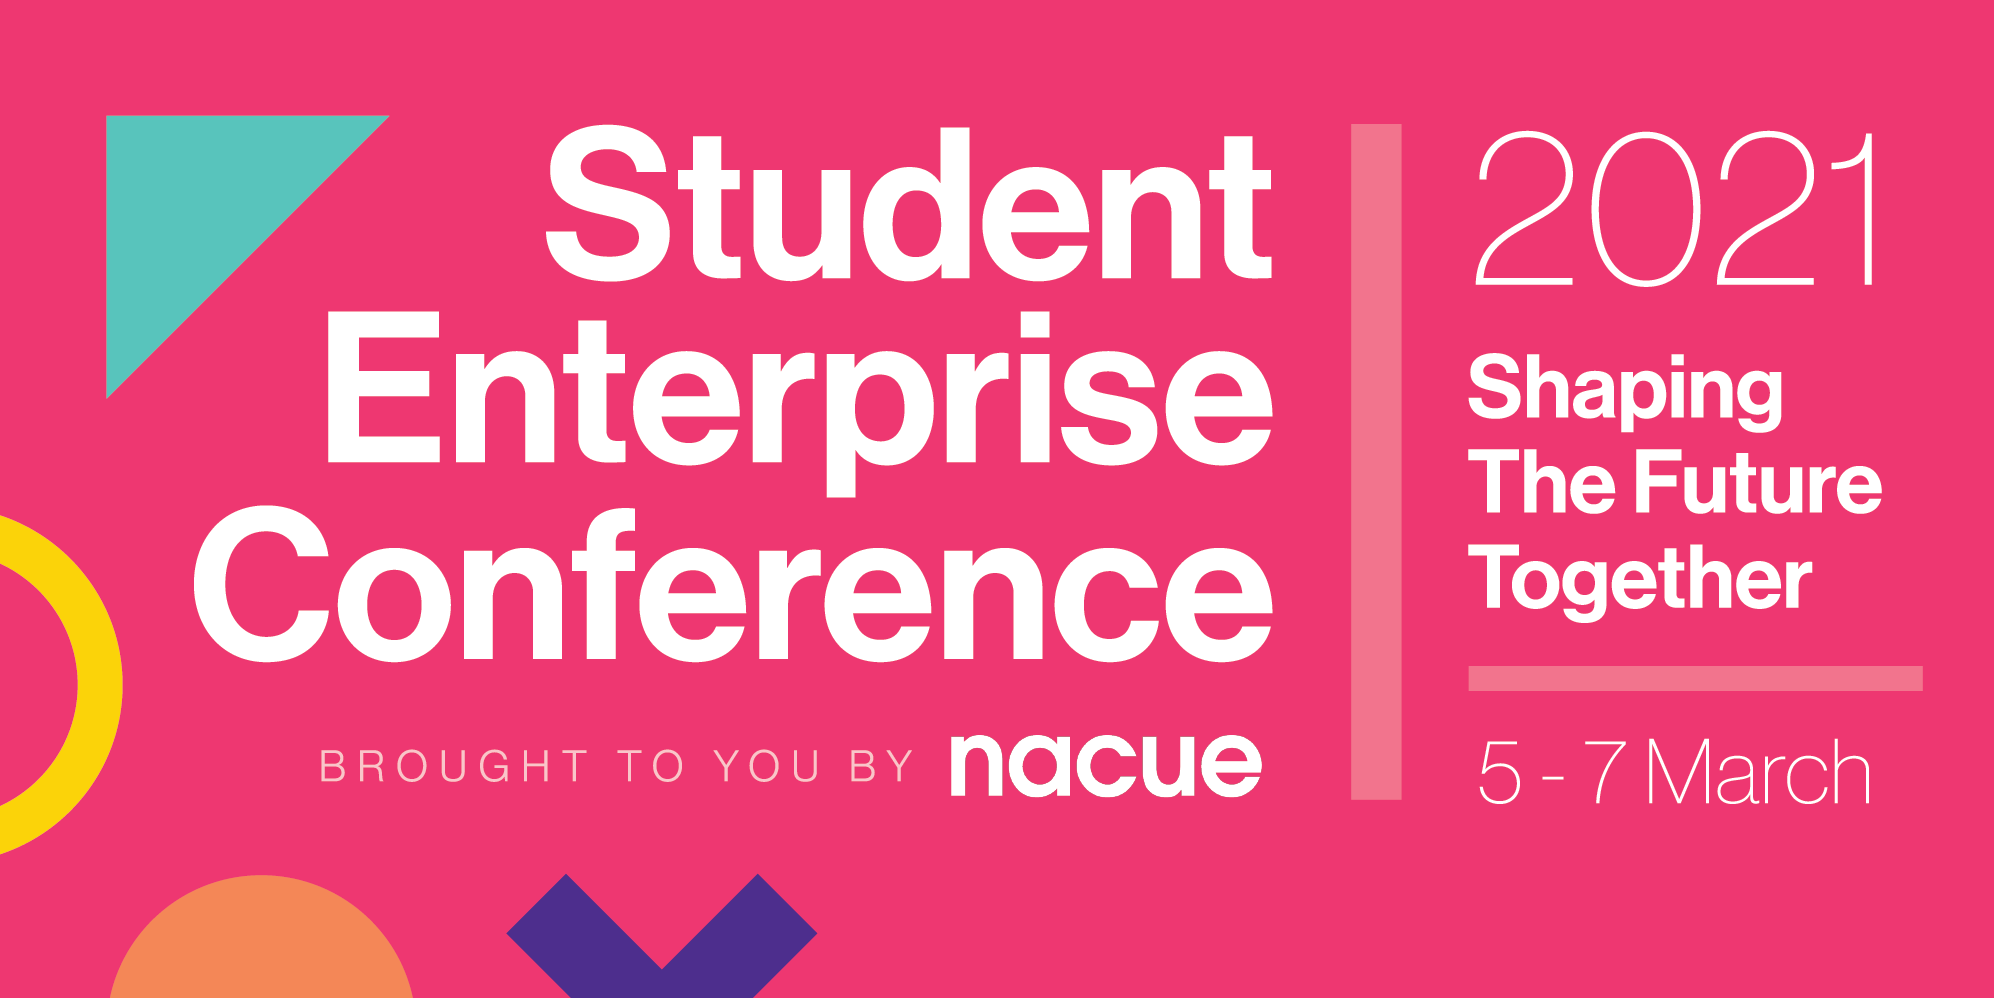 The Student Enterprise Conference 2021